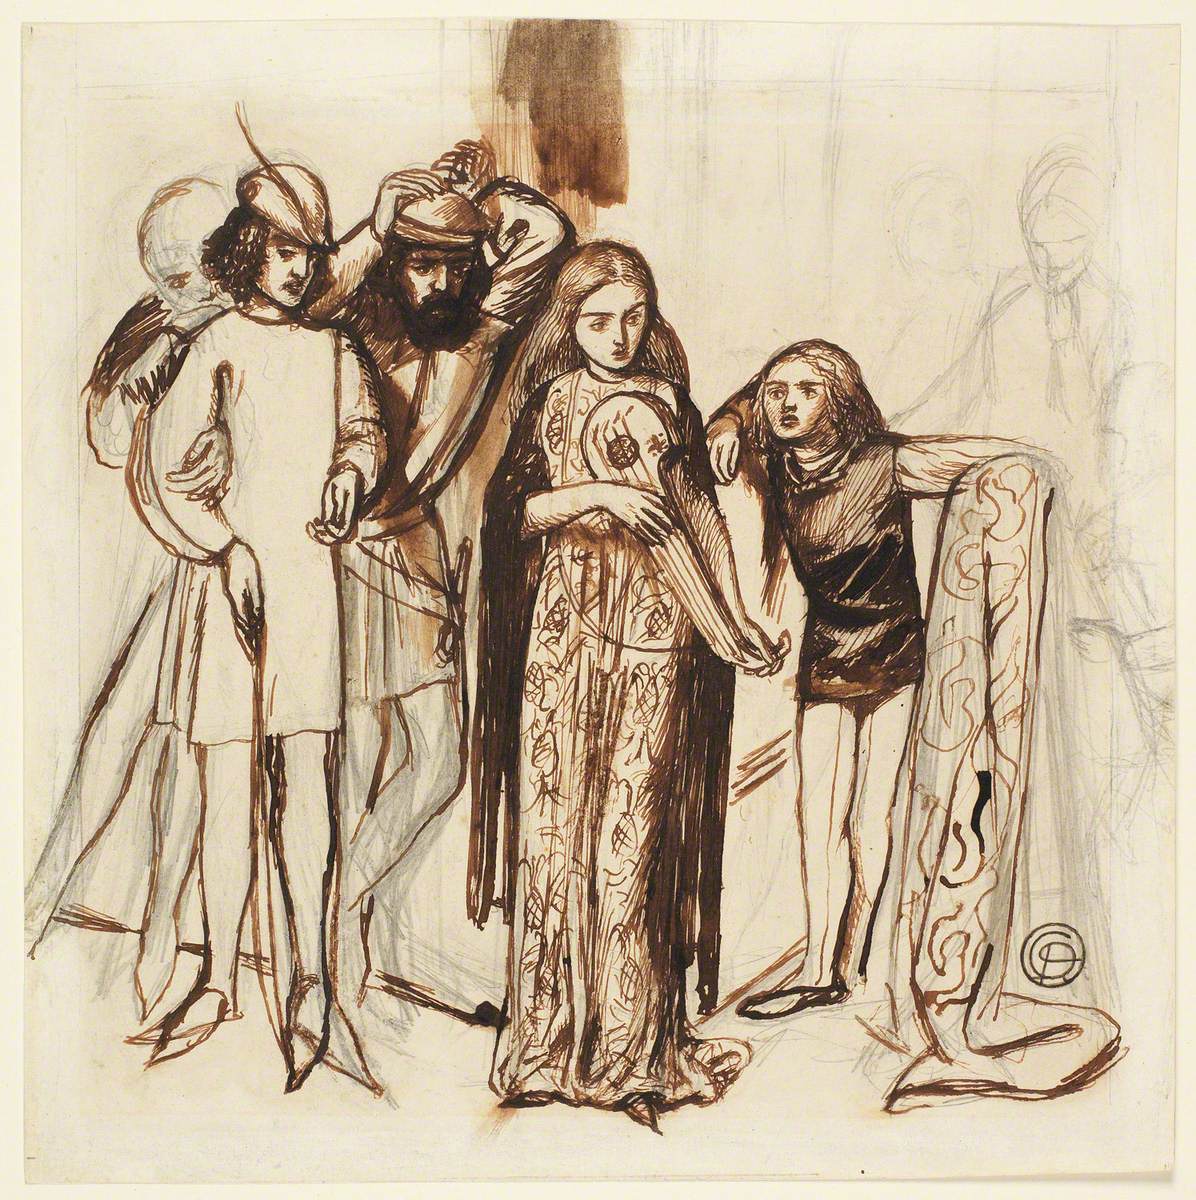 Composition of Six Figures in Medieval Dress (Scene from a Play)